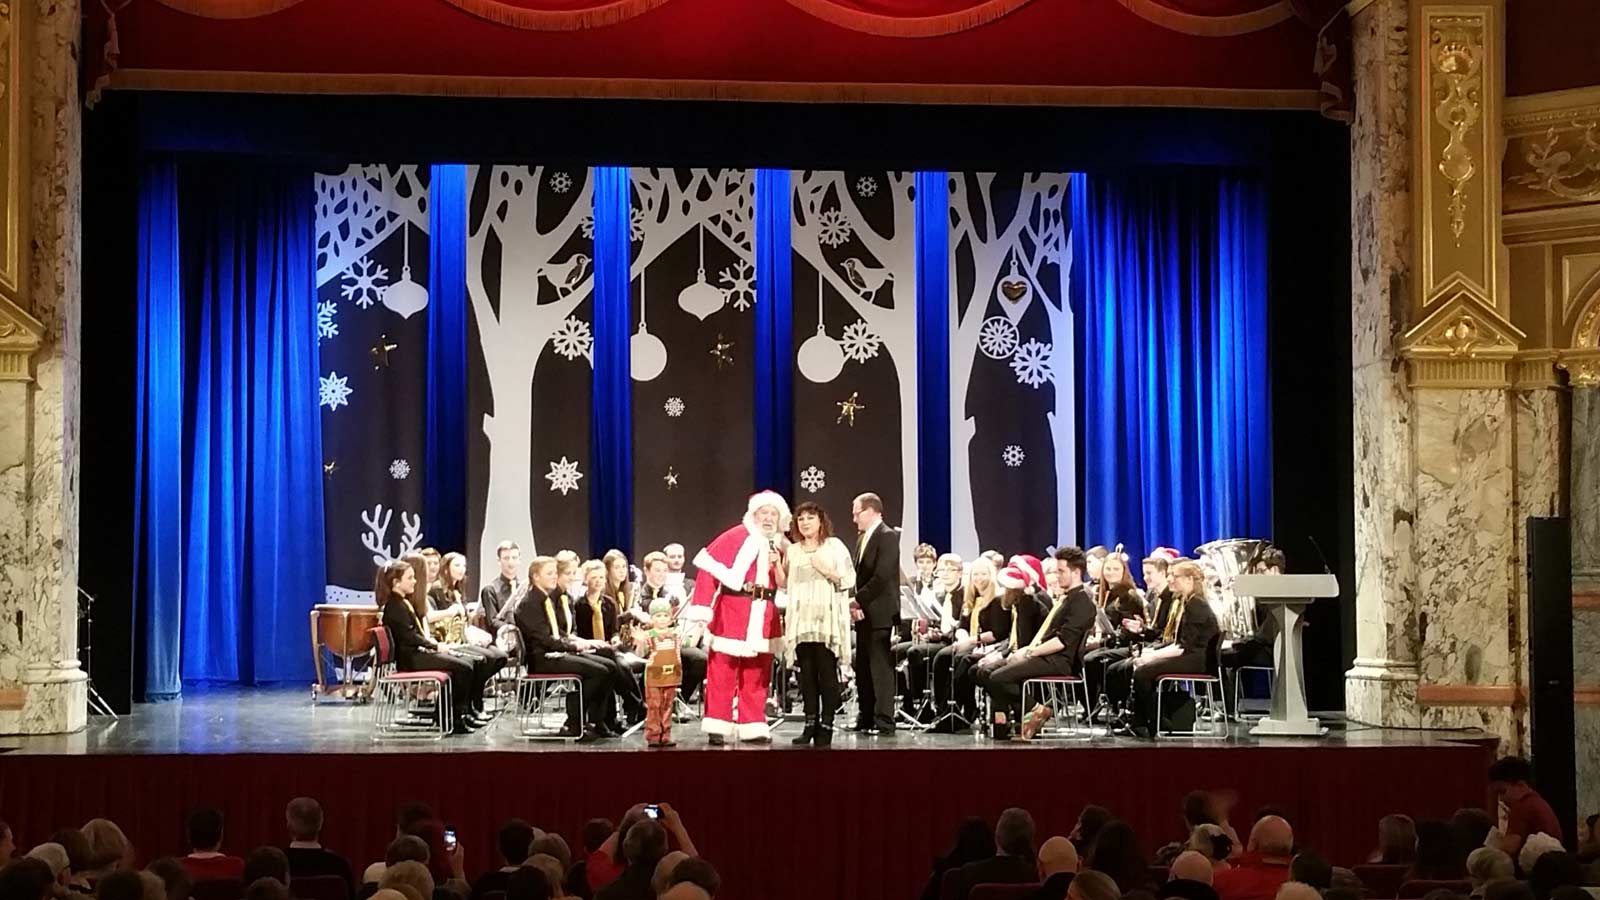 Santa taking time off from his busy schedule at last year’s annual Christmas Eve Carol Concert at the Royal Hall in Harrogate